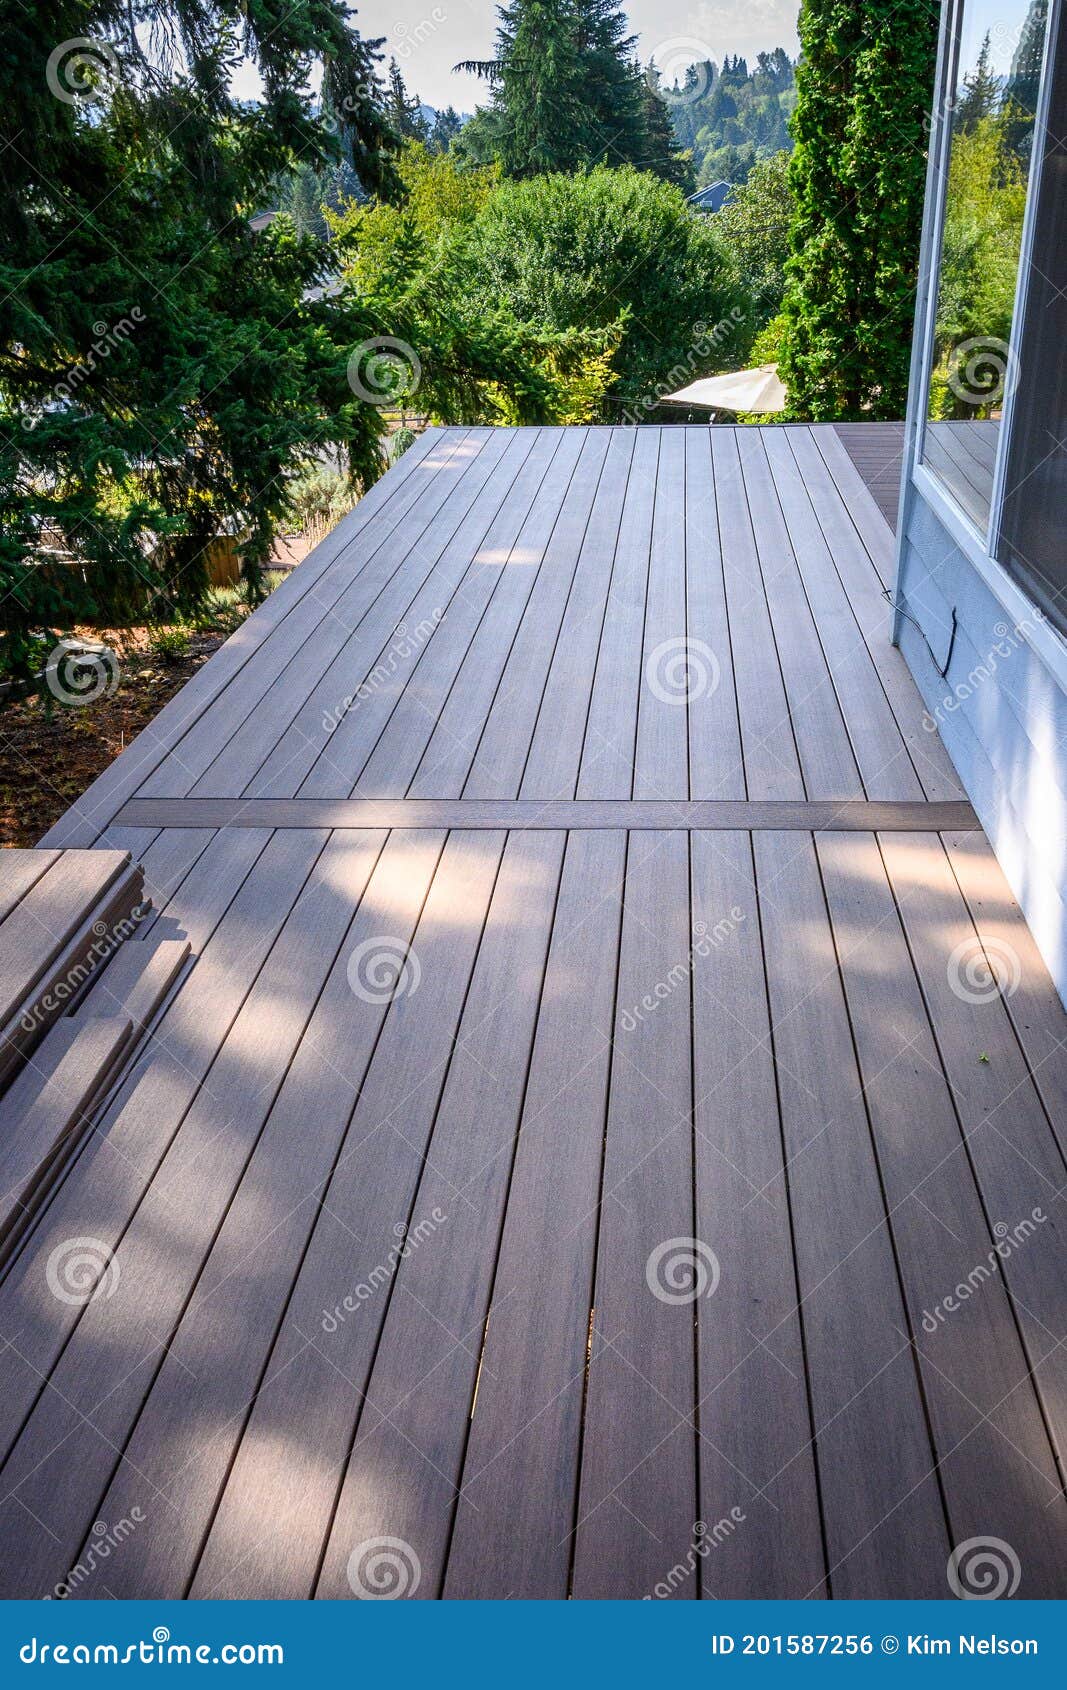 summer construction, outdoor deck under construction, new manufactured wood planks installed